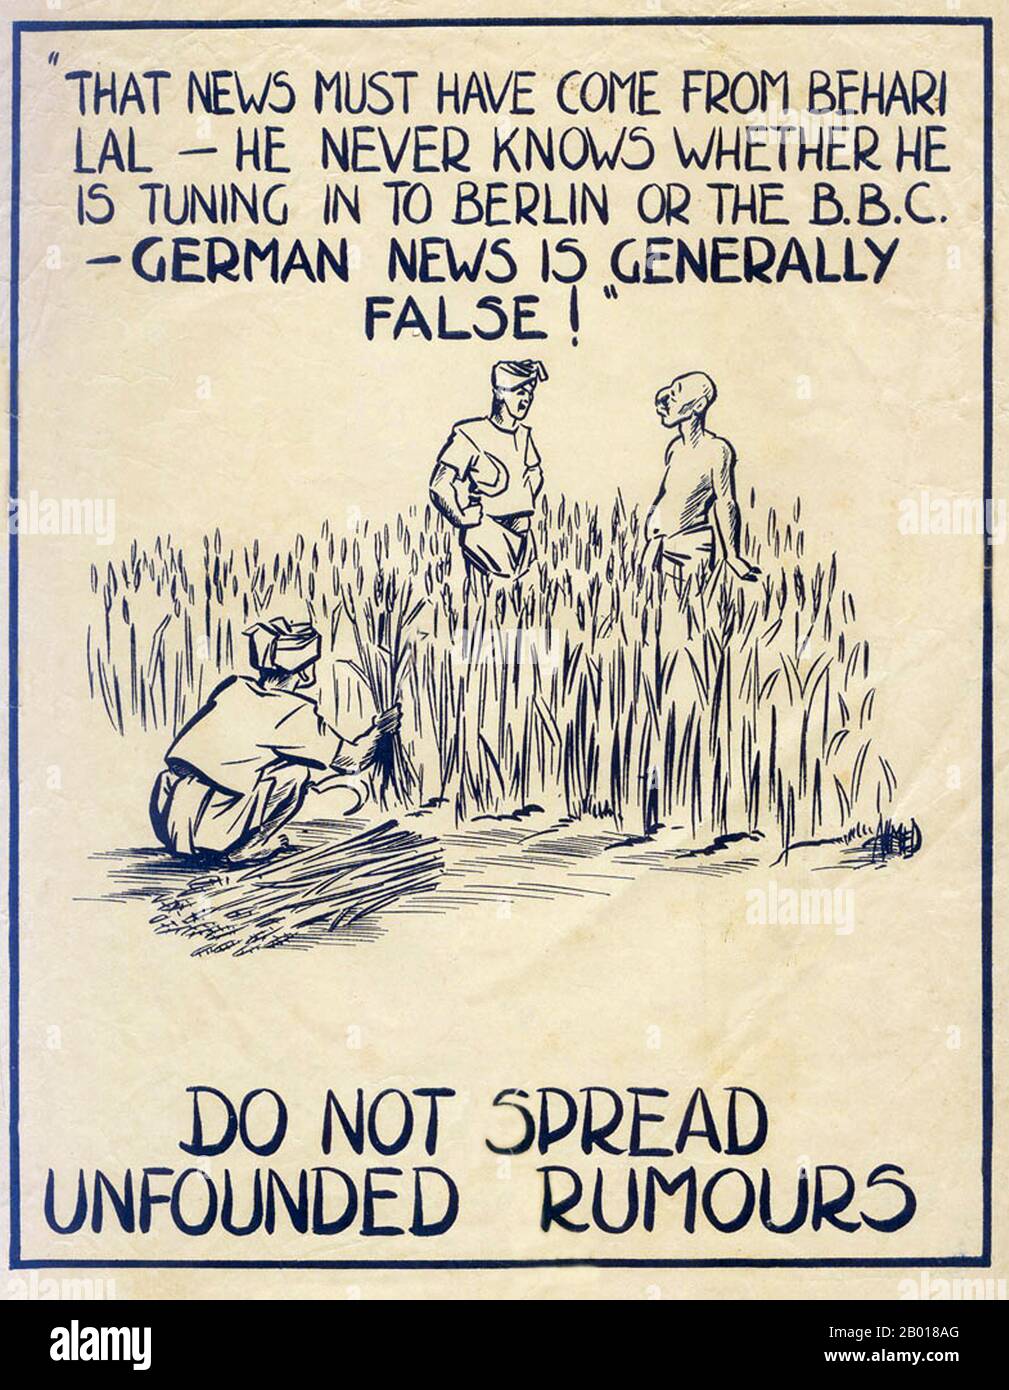 India: Indian peasantry seen through Oxbridge spectacles. British anti-Nazi propaganda poster, Bombay, c. 1941-1944.   China Burma India Theatre (CBI) was the name used by the United States Army for its forces operating in conjunction with British and Chinese Allied air and land forces in China, Burma, and India during World War II. Well-known US units in this theatre included the Flying Tigers, transport and bomber units flying the Hump, the 1st Air Commando Group, the engineers who built Ledo Road, and the 5307th Composite Unit (Provisional), otherwise known as Merrill's Marauders. Stock Photo